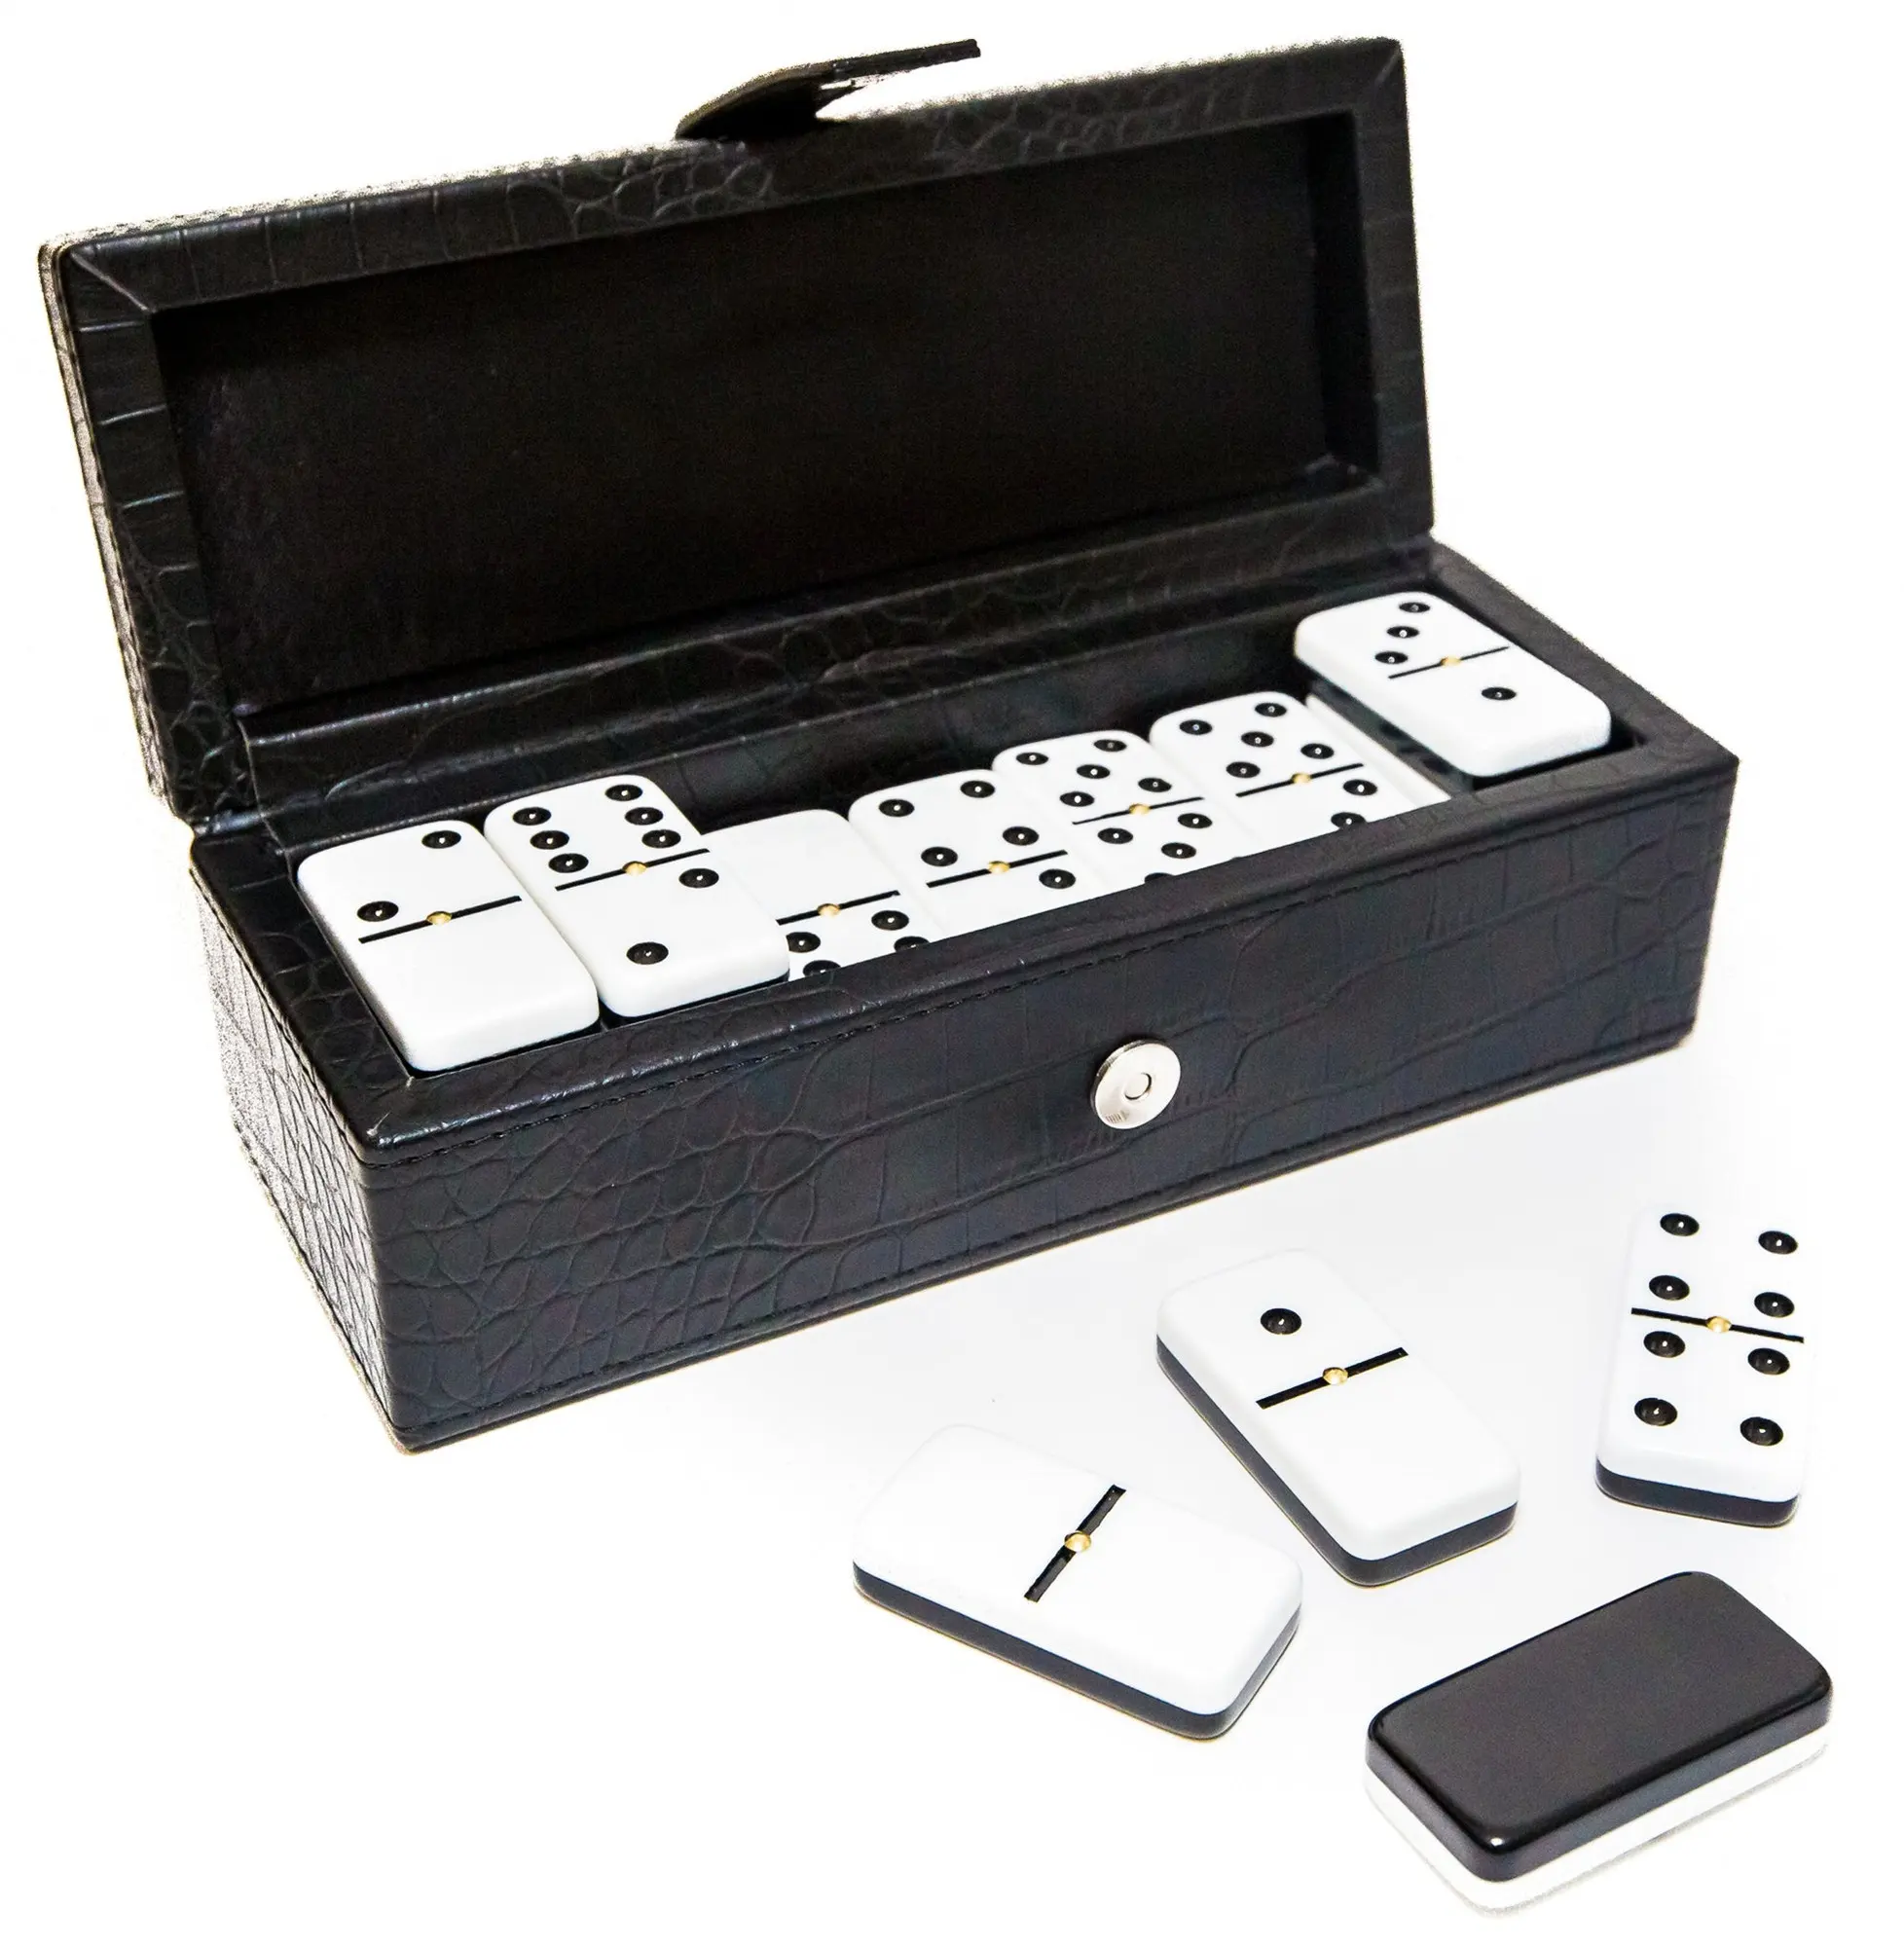 White Professional Domino Set Double Six Jumbo Dominoes with Brass Spinner dominos set for Muggins All Fives Chicken Foot